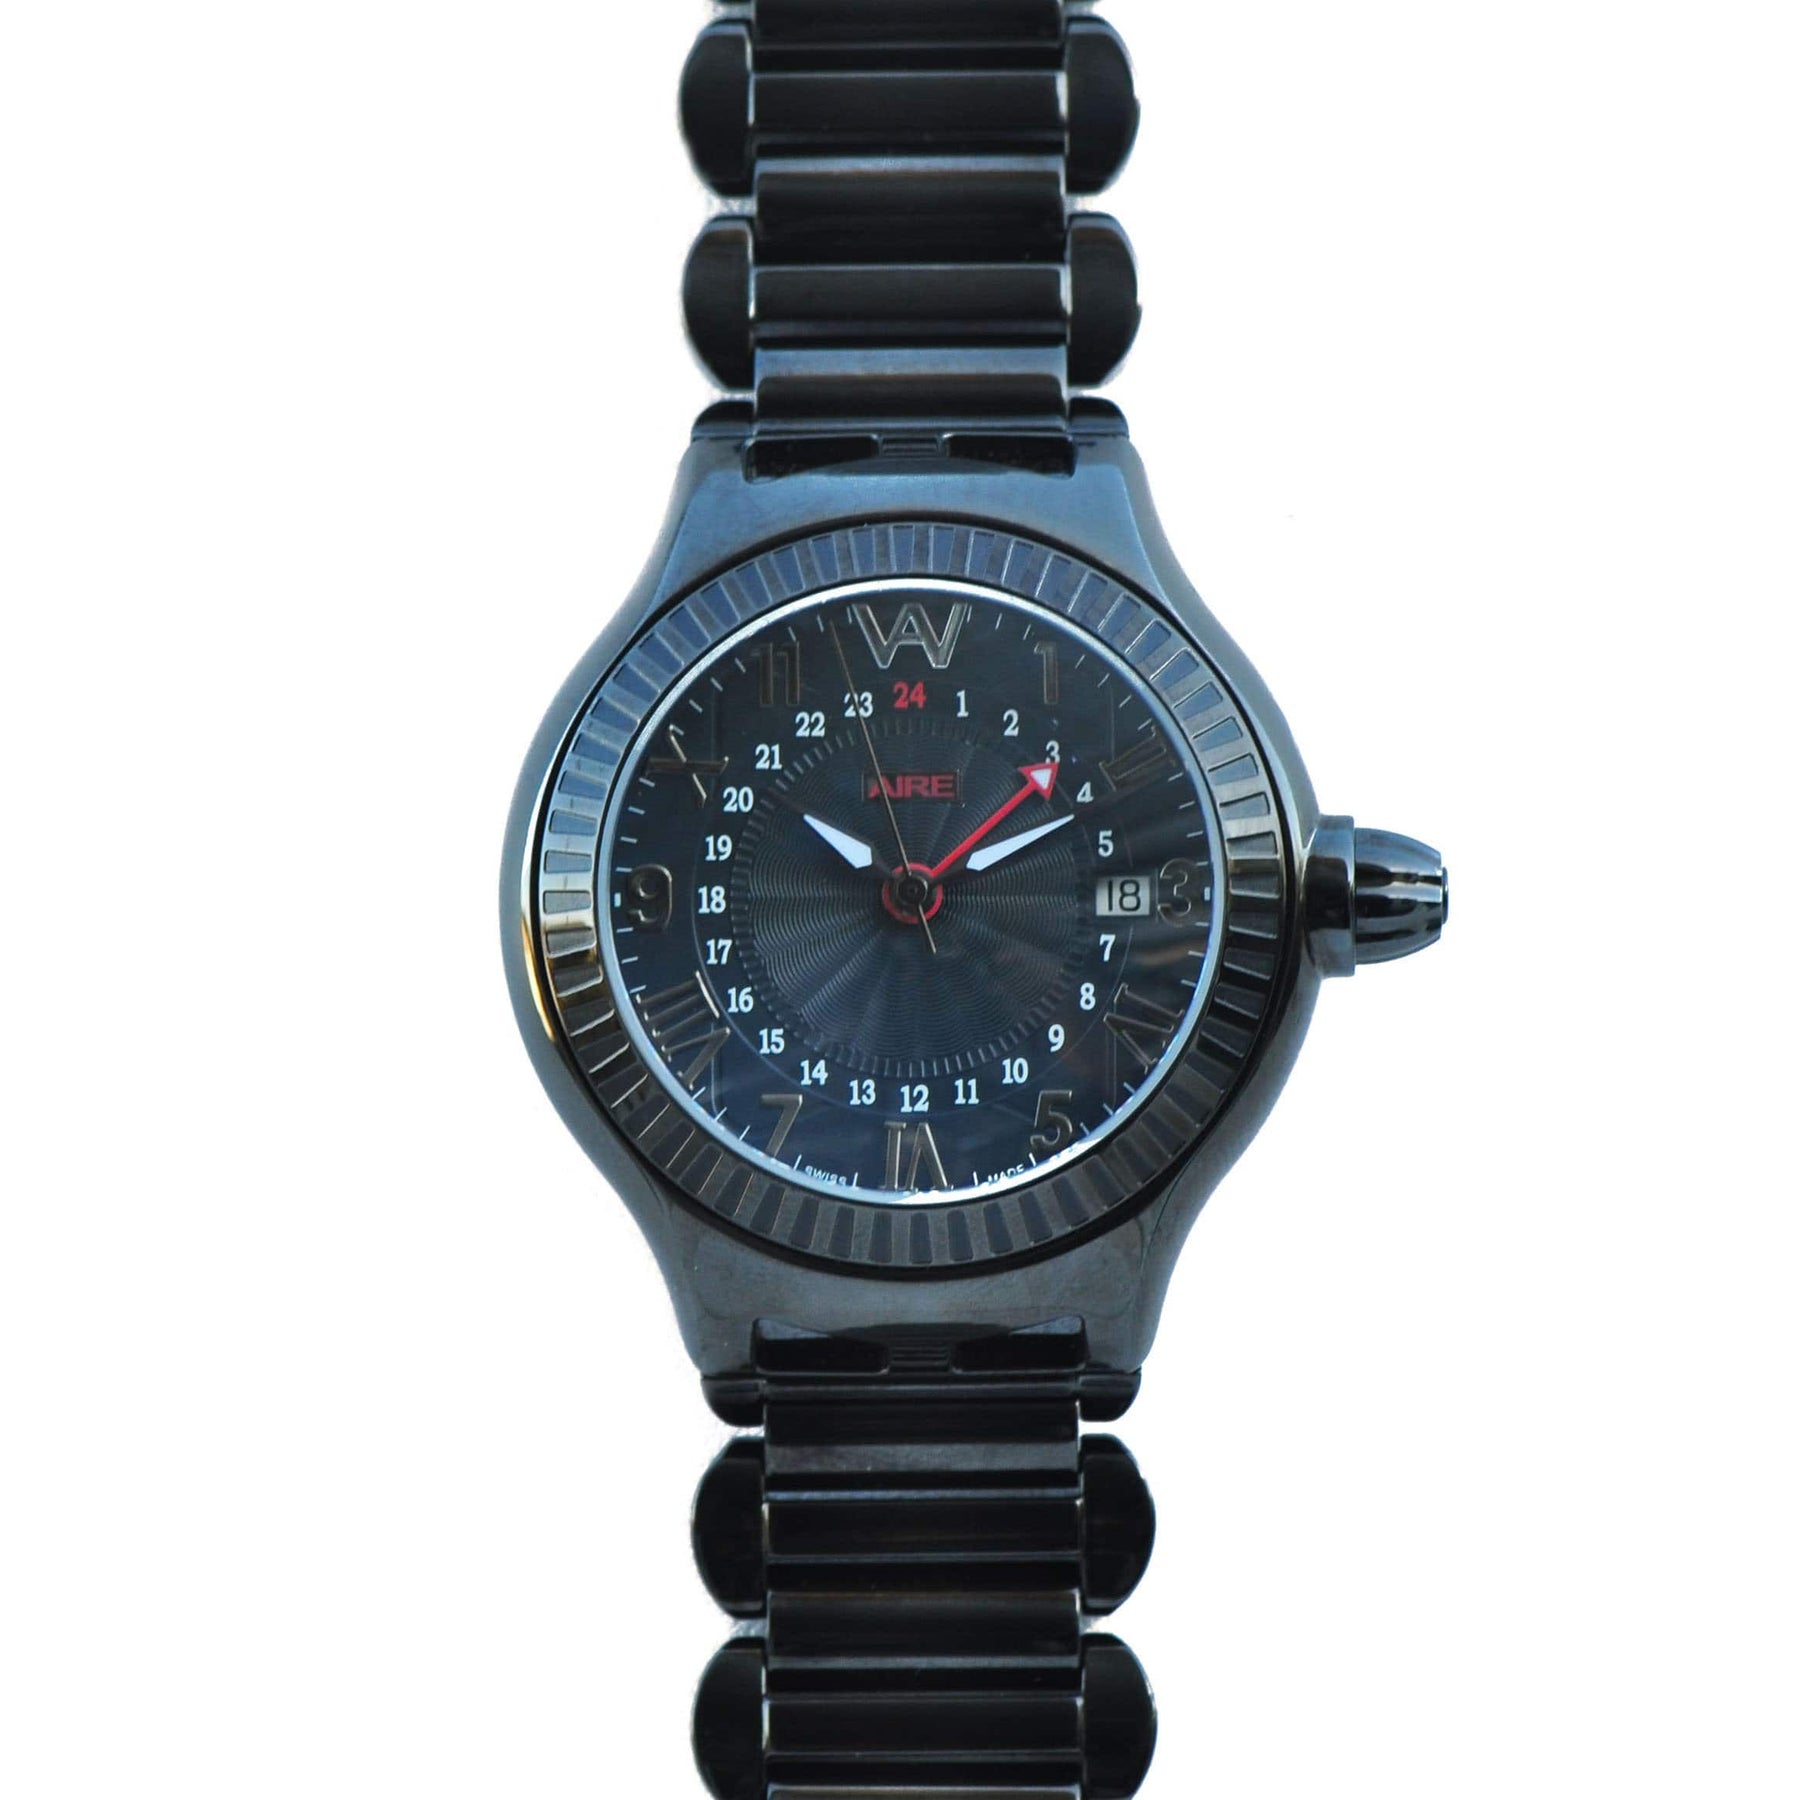 CHRIS AIRE WATCH - PARLAY GMT BLACK - Chris Aire Fine Jewelry & Timepieces